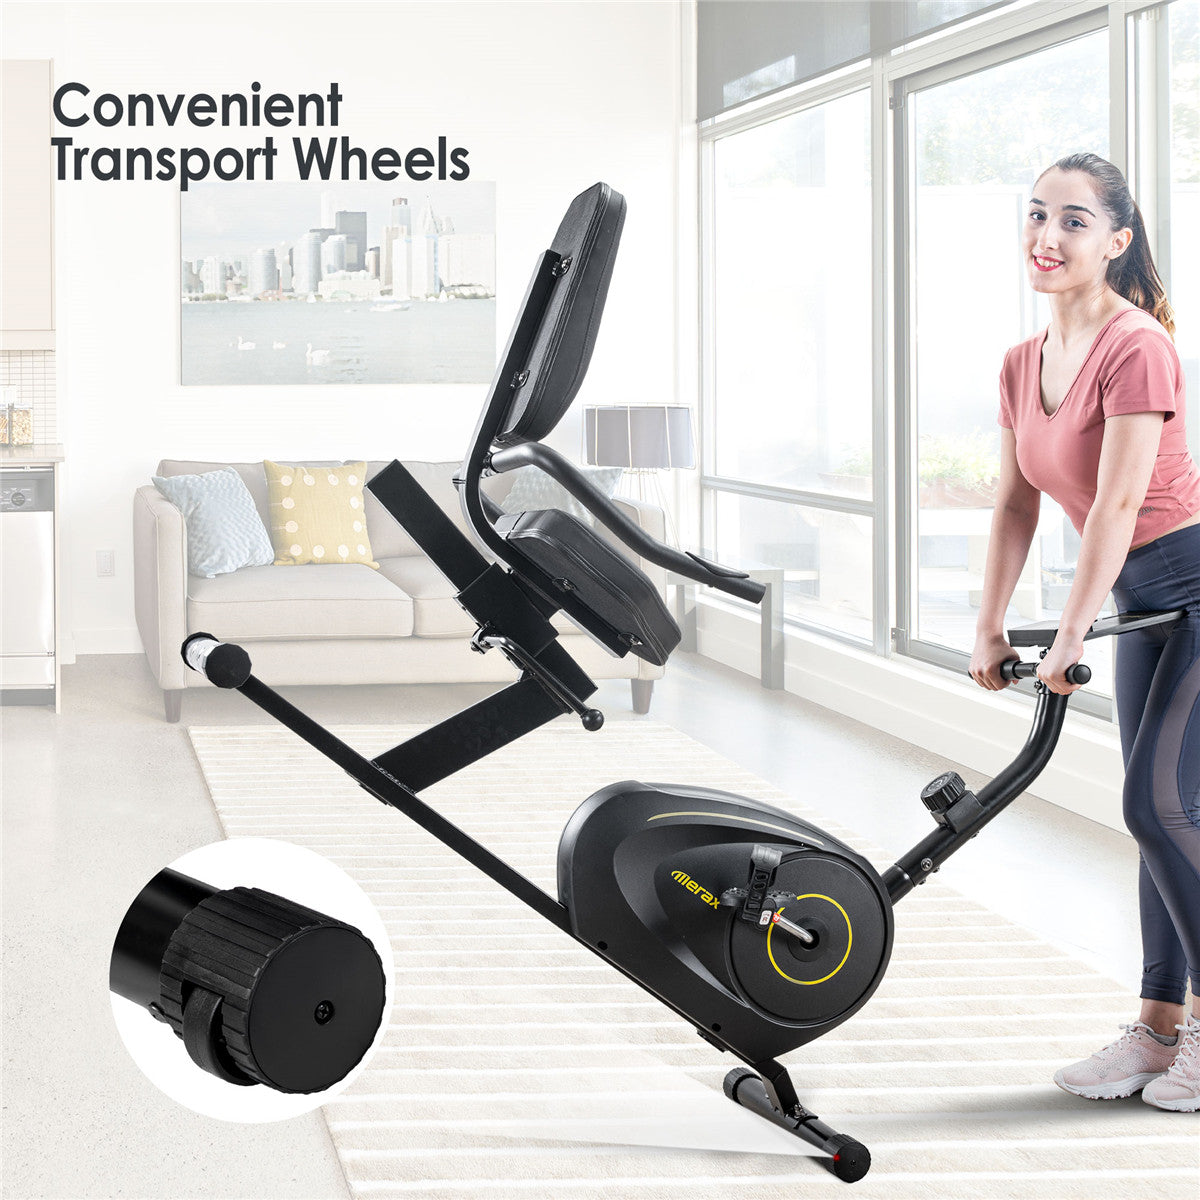 Recumbent Exercise Bike with 8-Level Resistance | Bluetooth Monitor | Easy Adjustable Seat